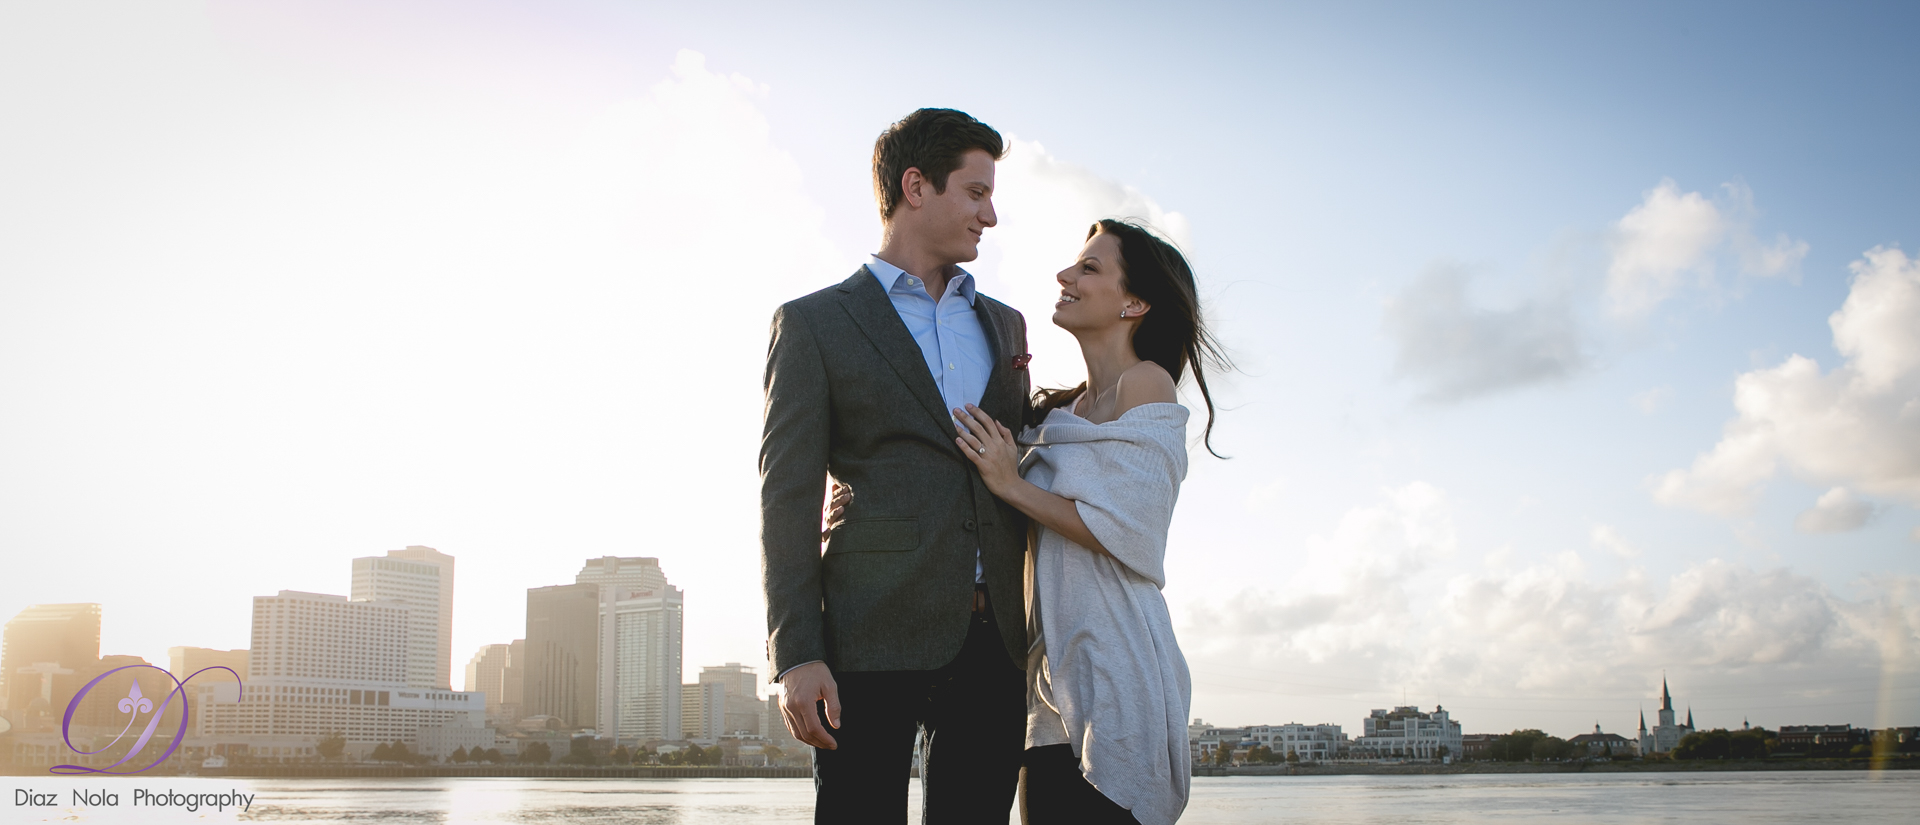 Engagements Photography in New Orleans (18 of 38)